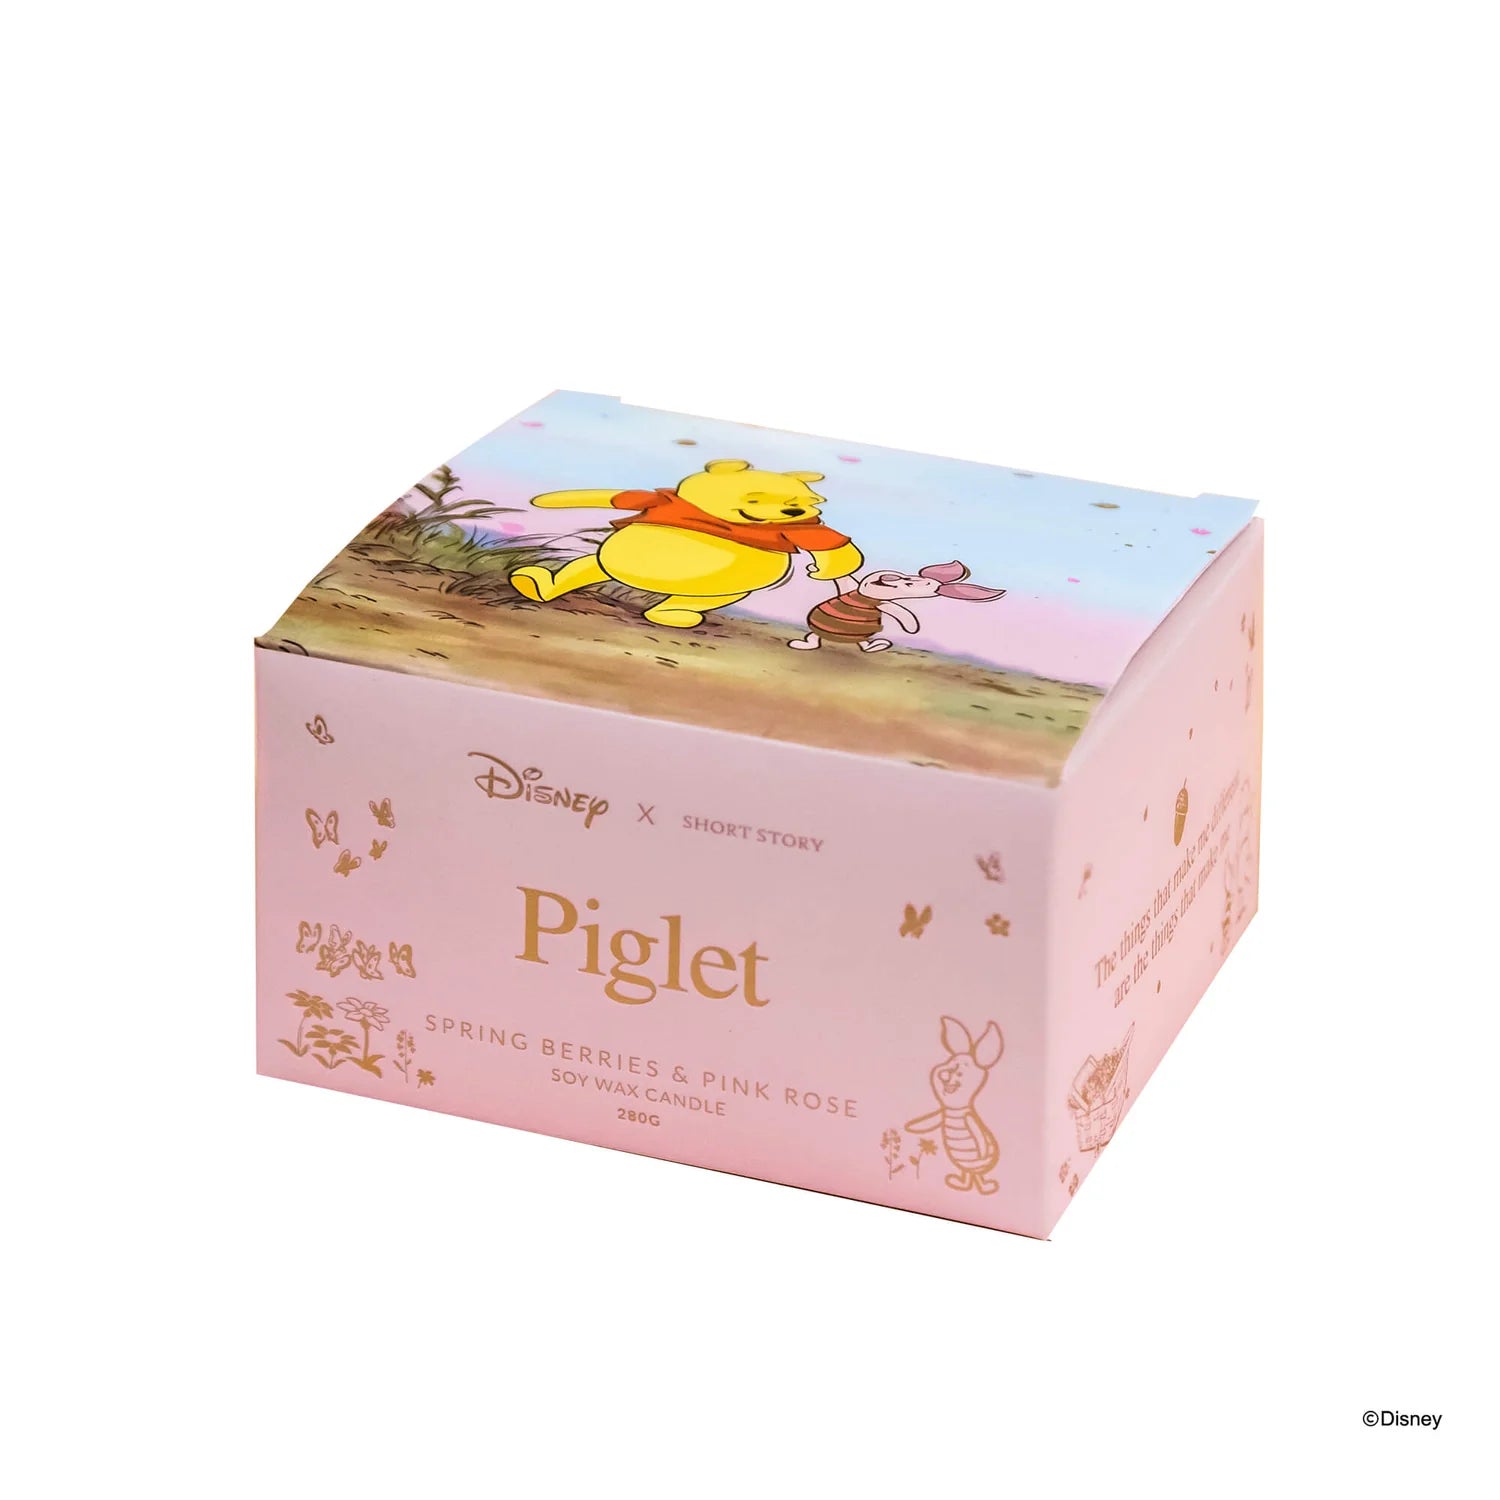 Short Story - Disney Winnie The Pooh Piglet Candle